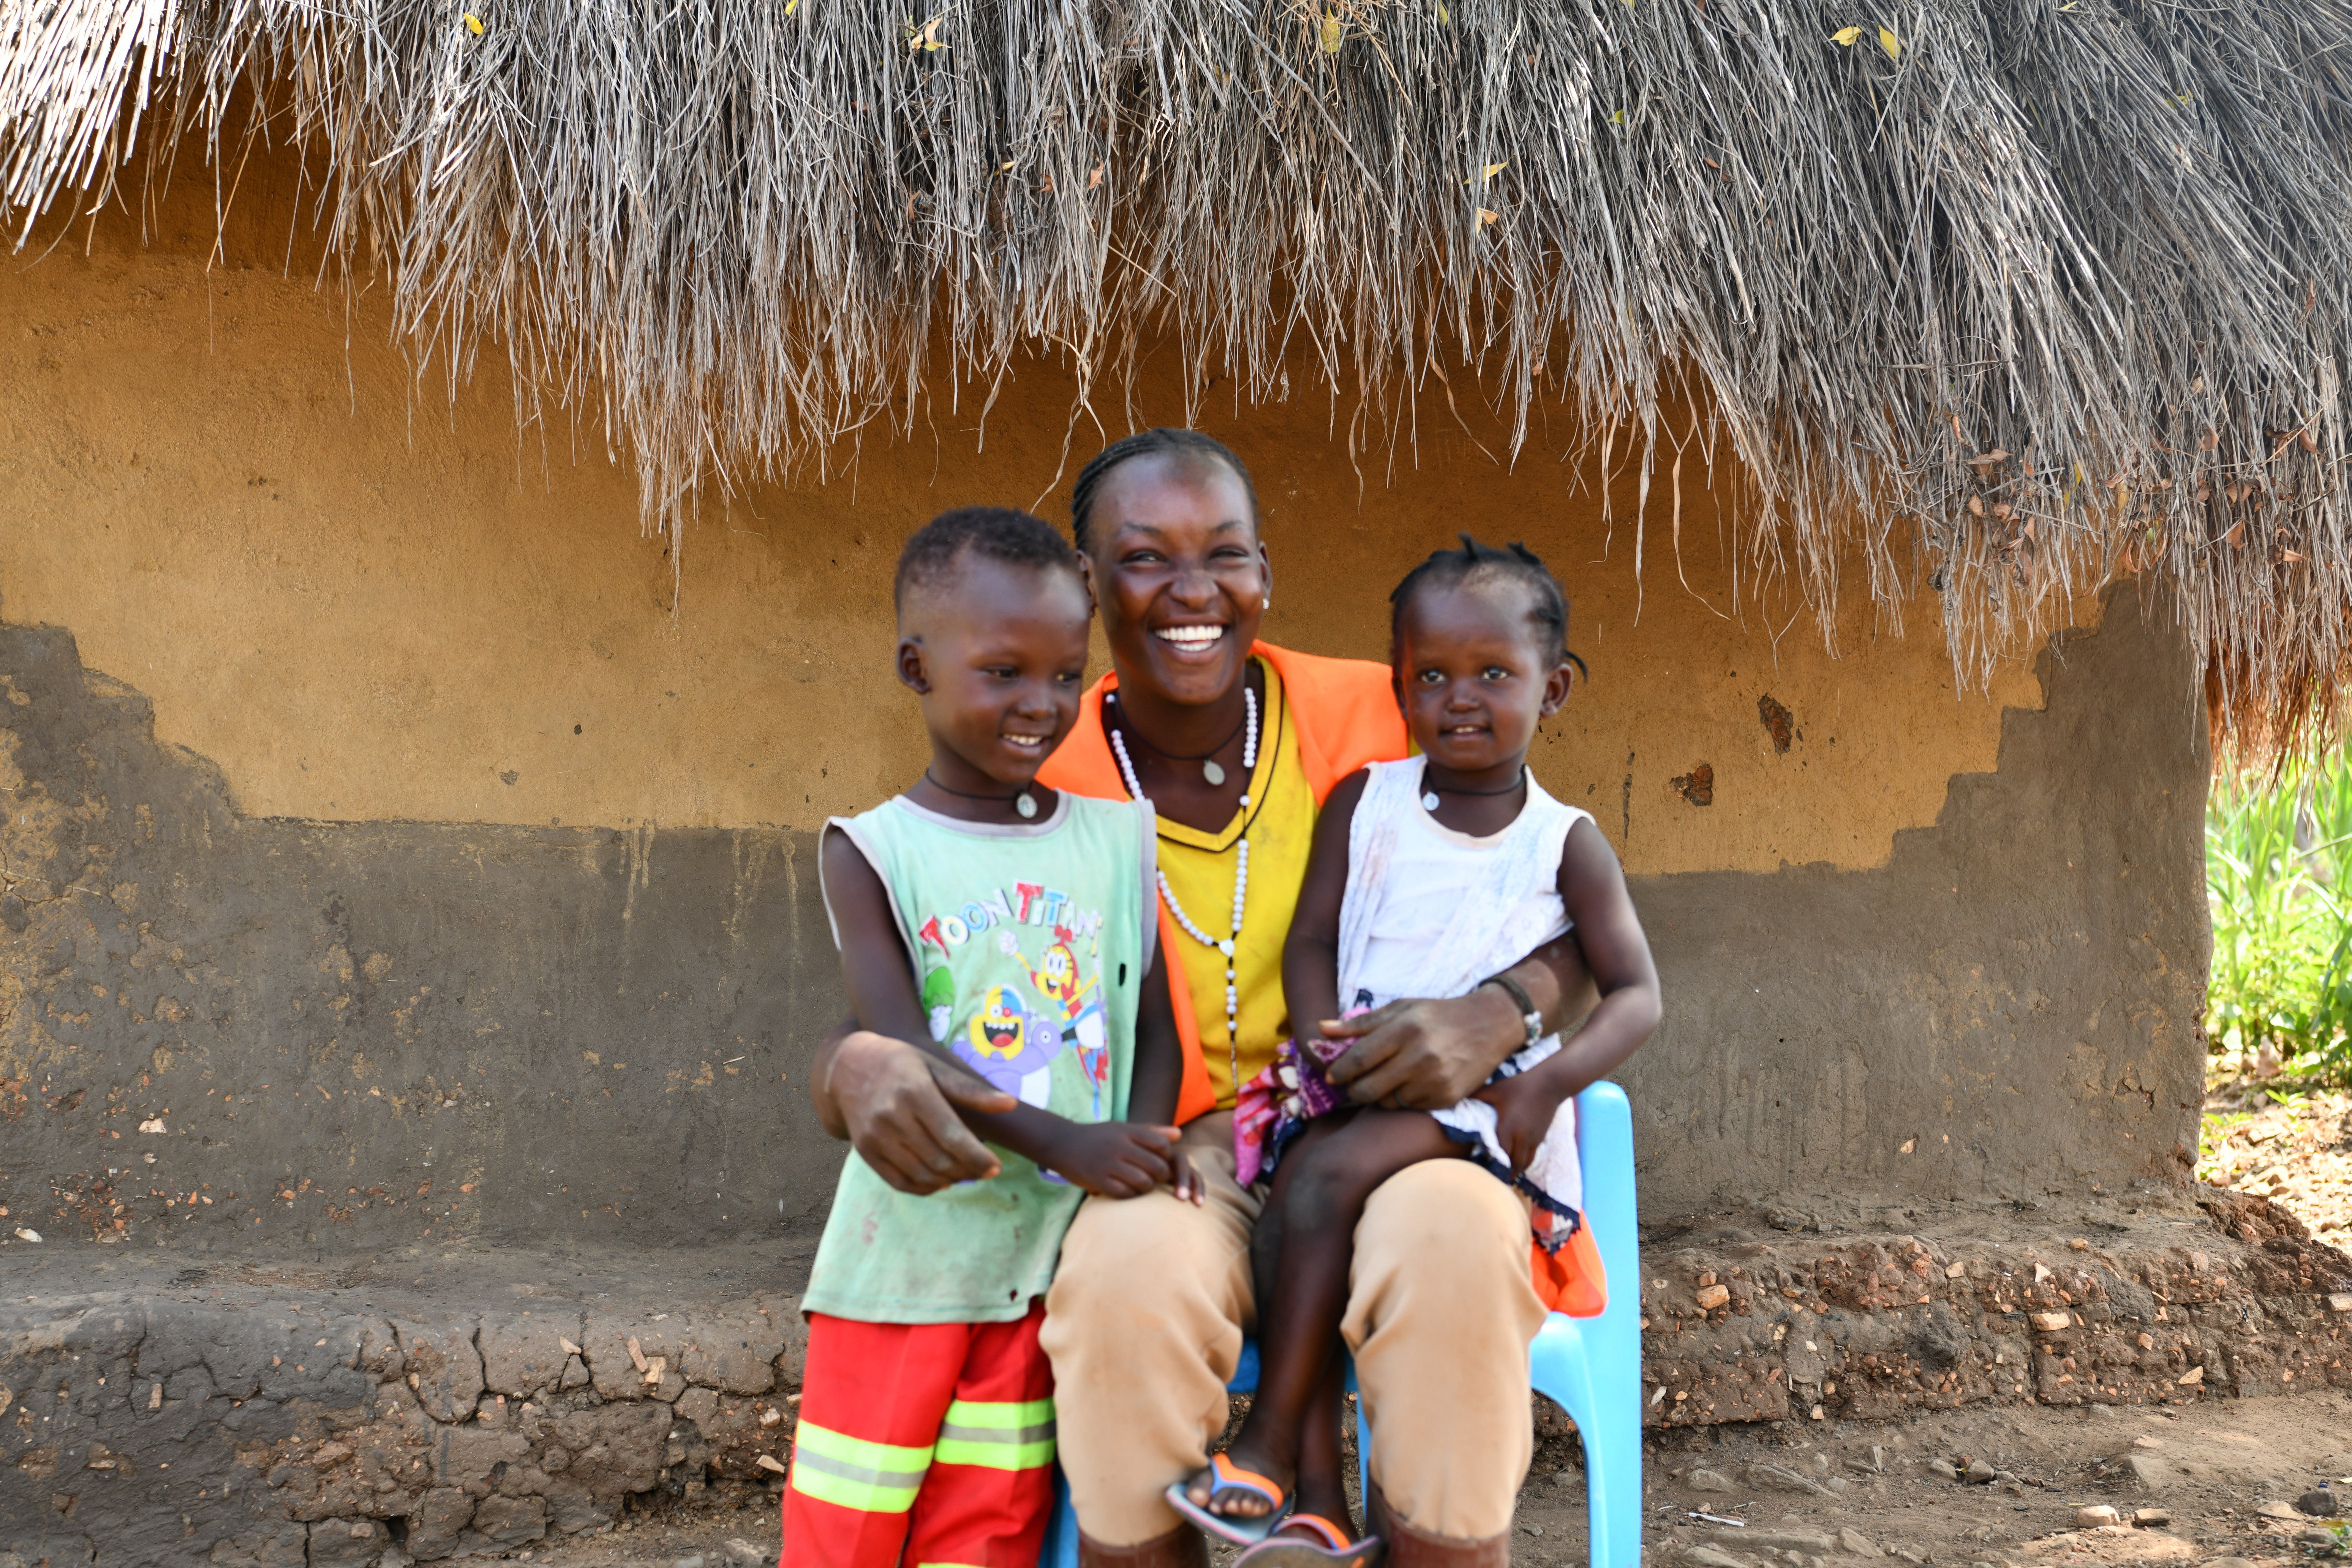 Poni in a light moment with her 2 children in Imvempi Refugee Settlement, Terego District